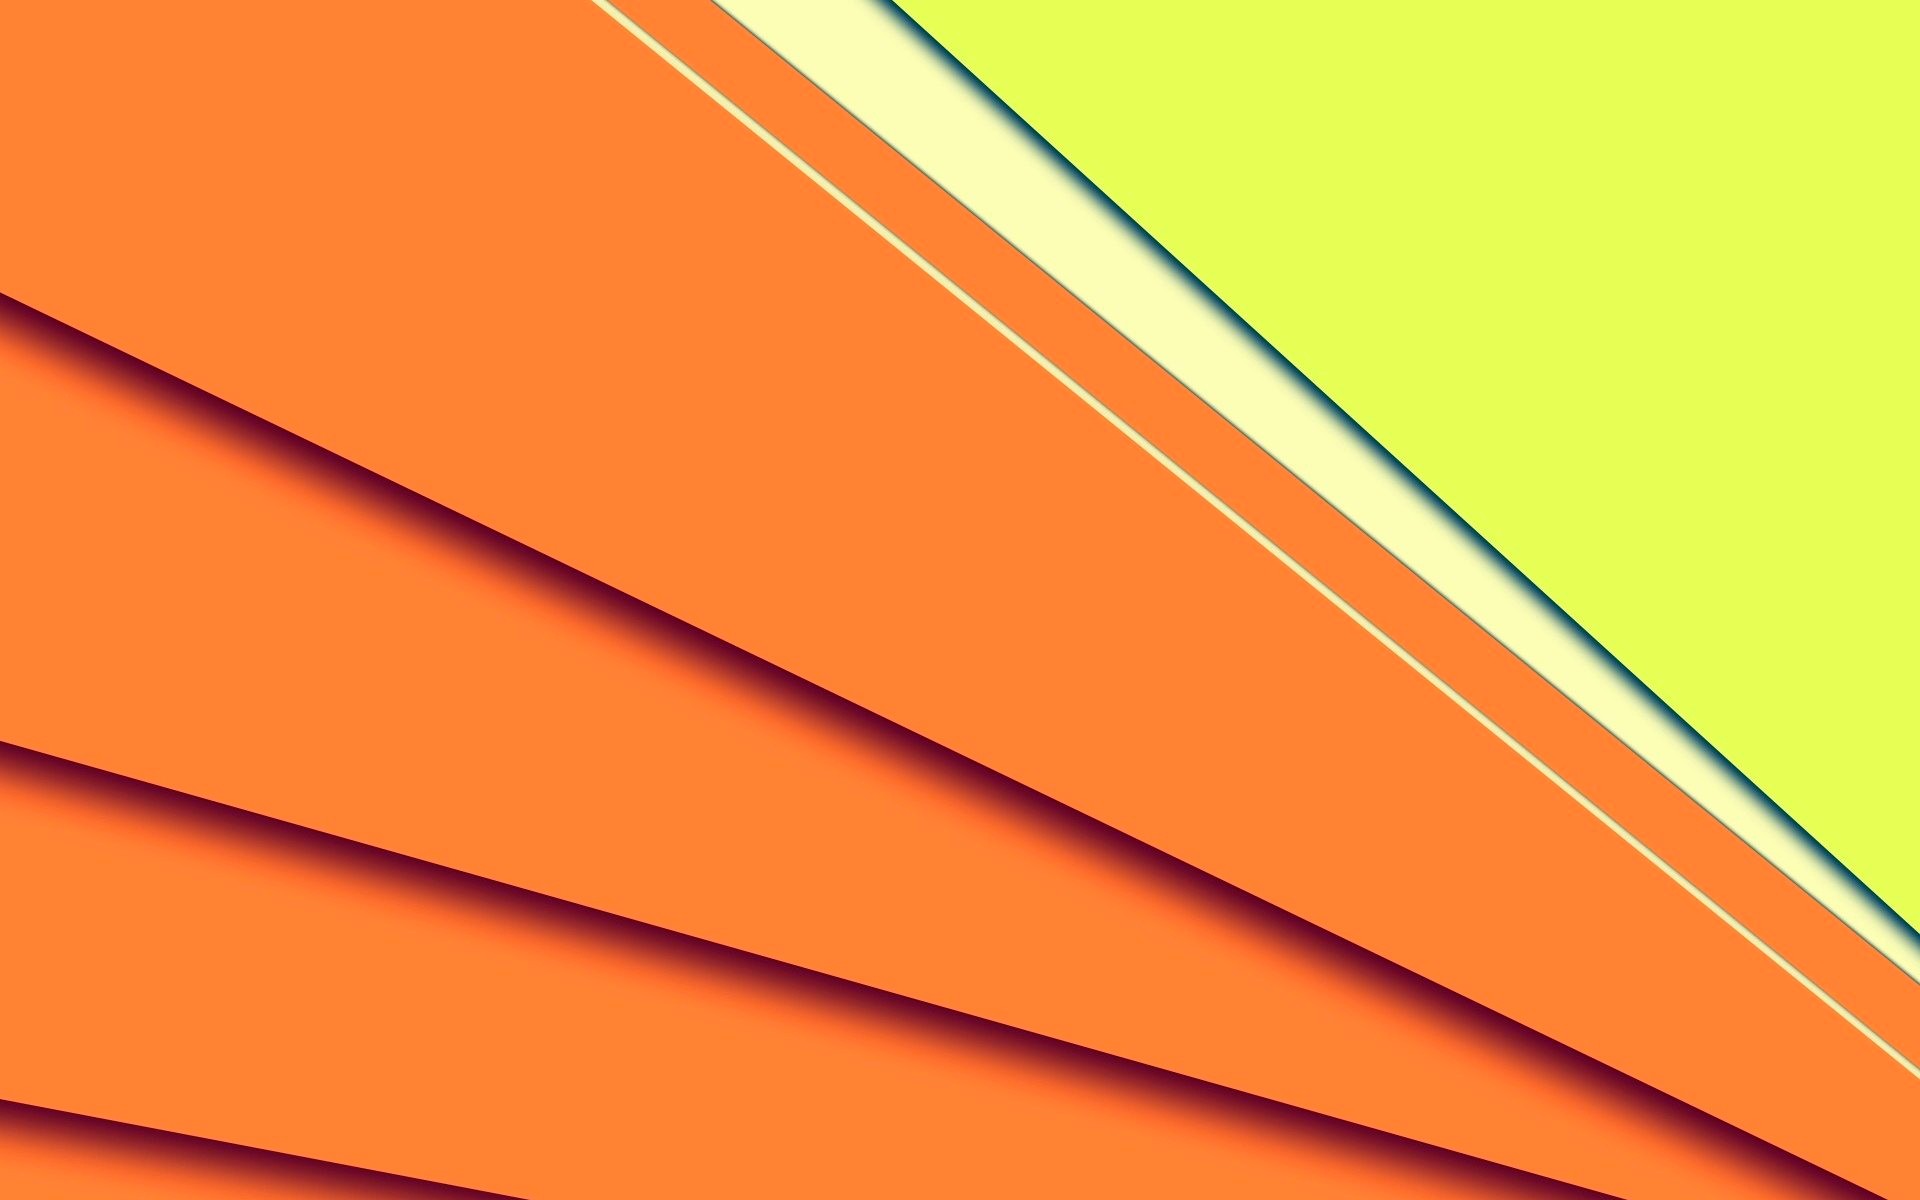 Abstract Lines HD Wallpaper | Background Image